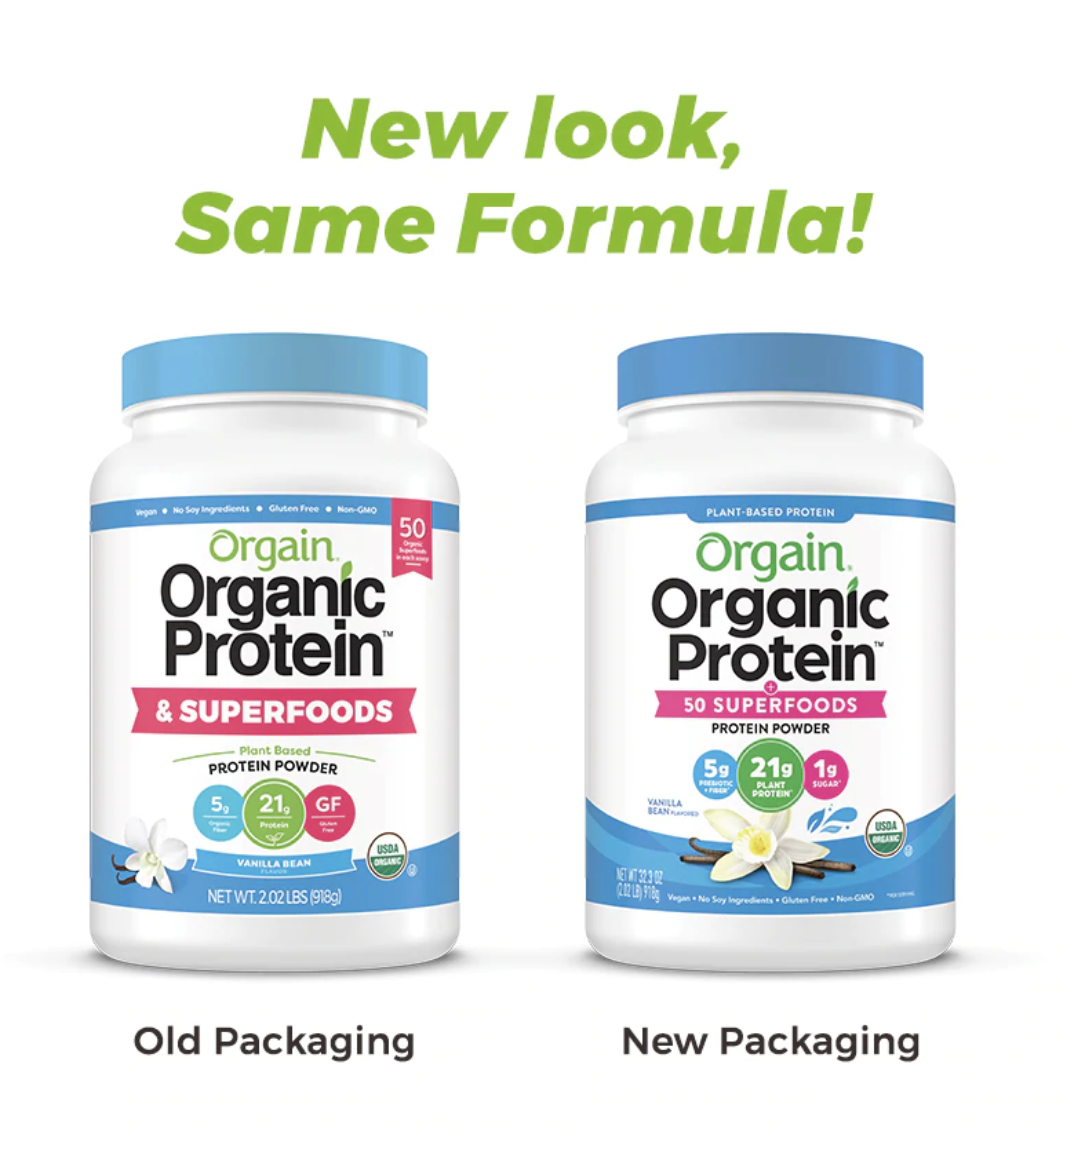 orgain organic protein 50 superfoods